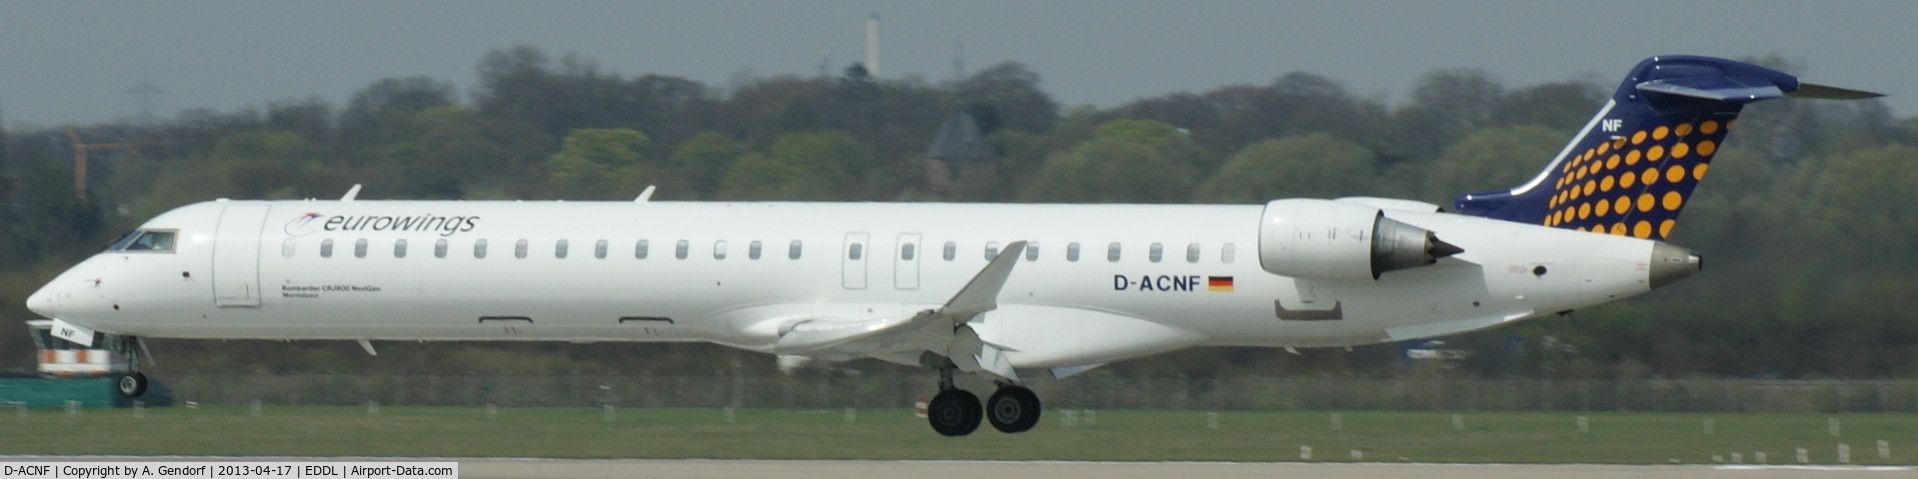 D-ACNF, 2009 Bombardier CRJ-900 (CL-600-2D24) C/N 15243, Eurowings (Lufthansa Regional cs.), is seen here shortly before touch down at Düsseldorf Int´l (EDDL)